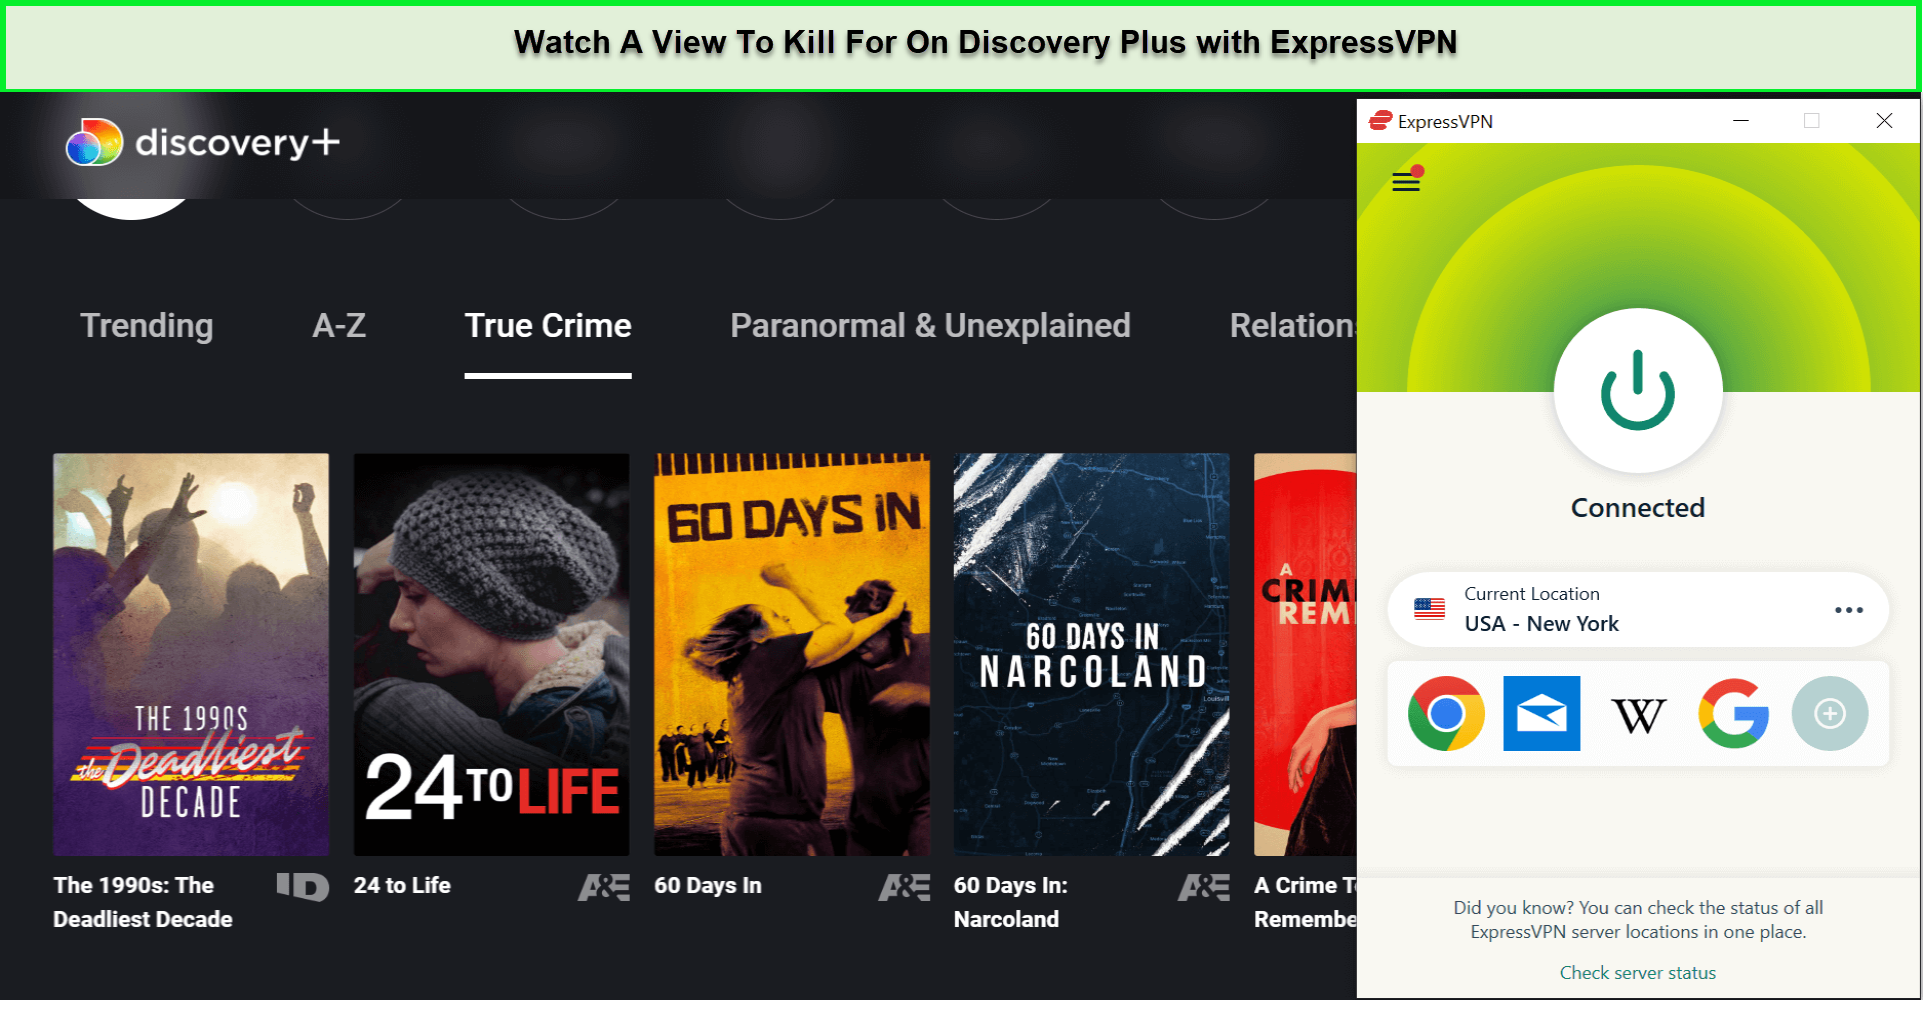 Watch-A-View-To-Kill-For-in-New Zealand-On-Discovery-Plus-with-ExpressVPN